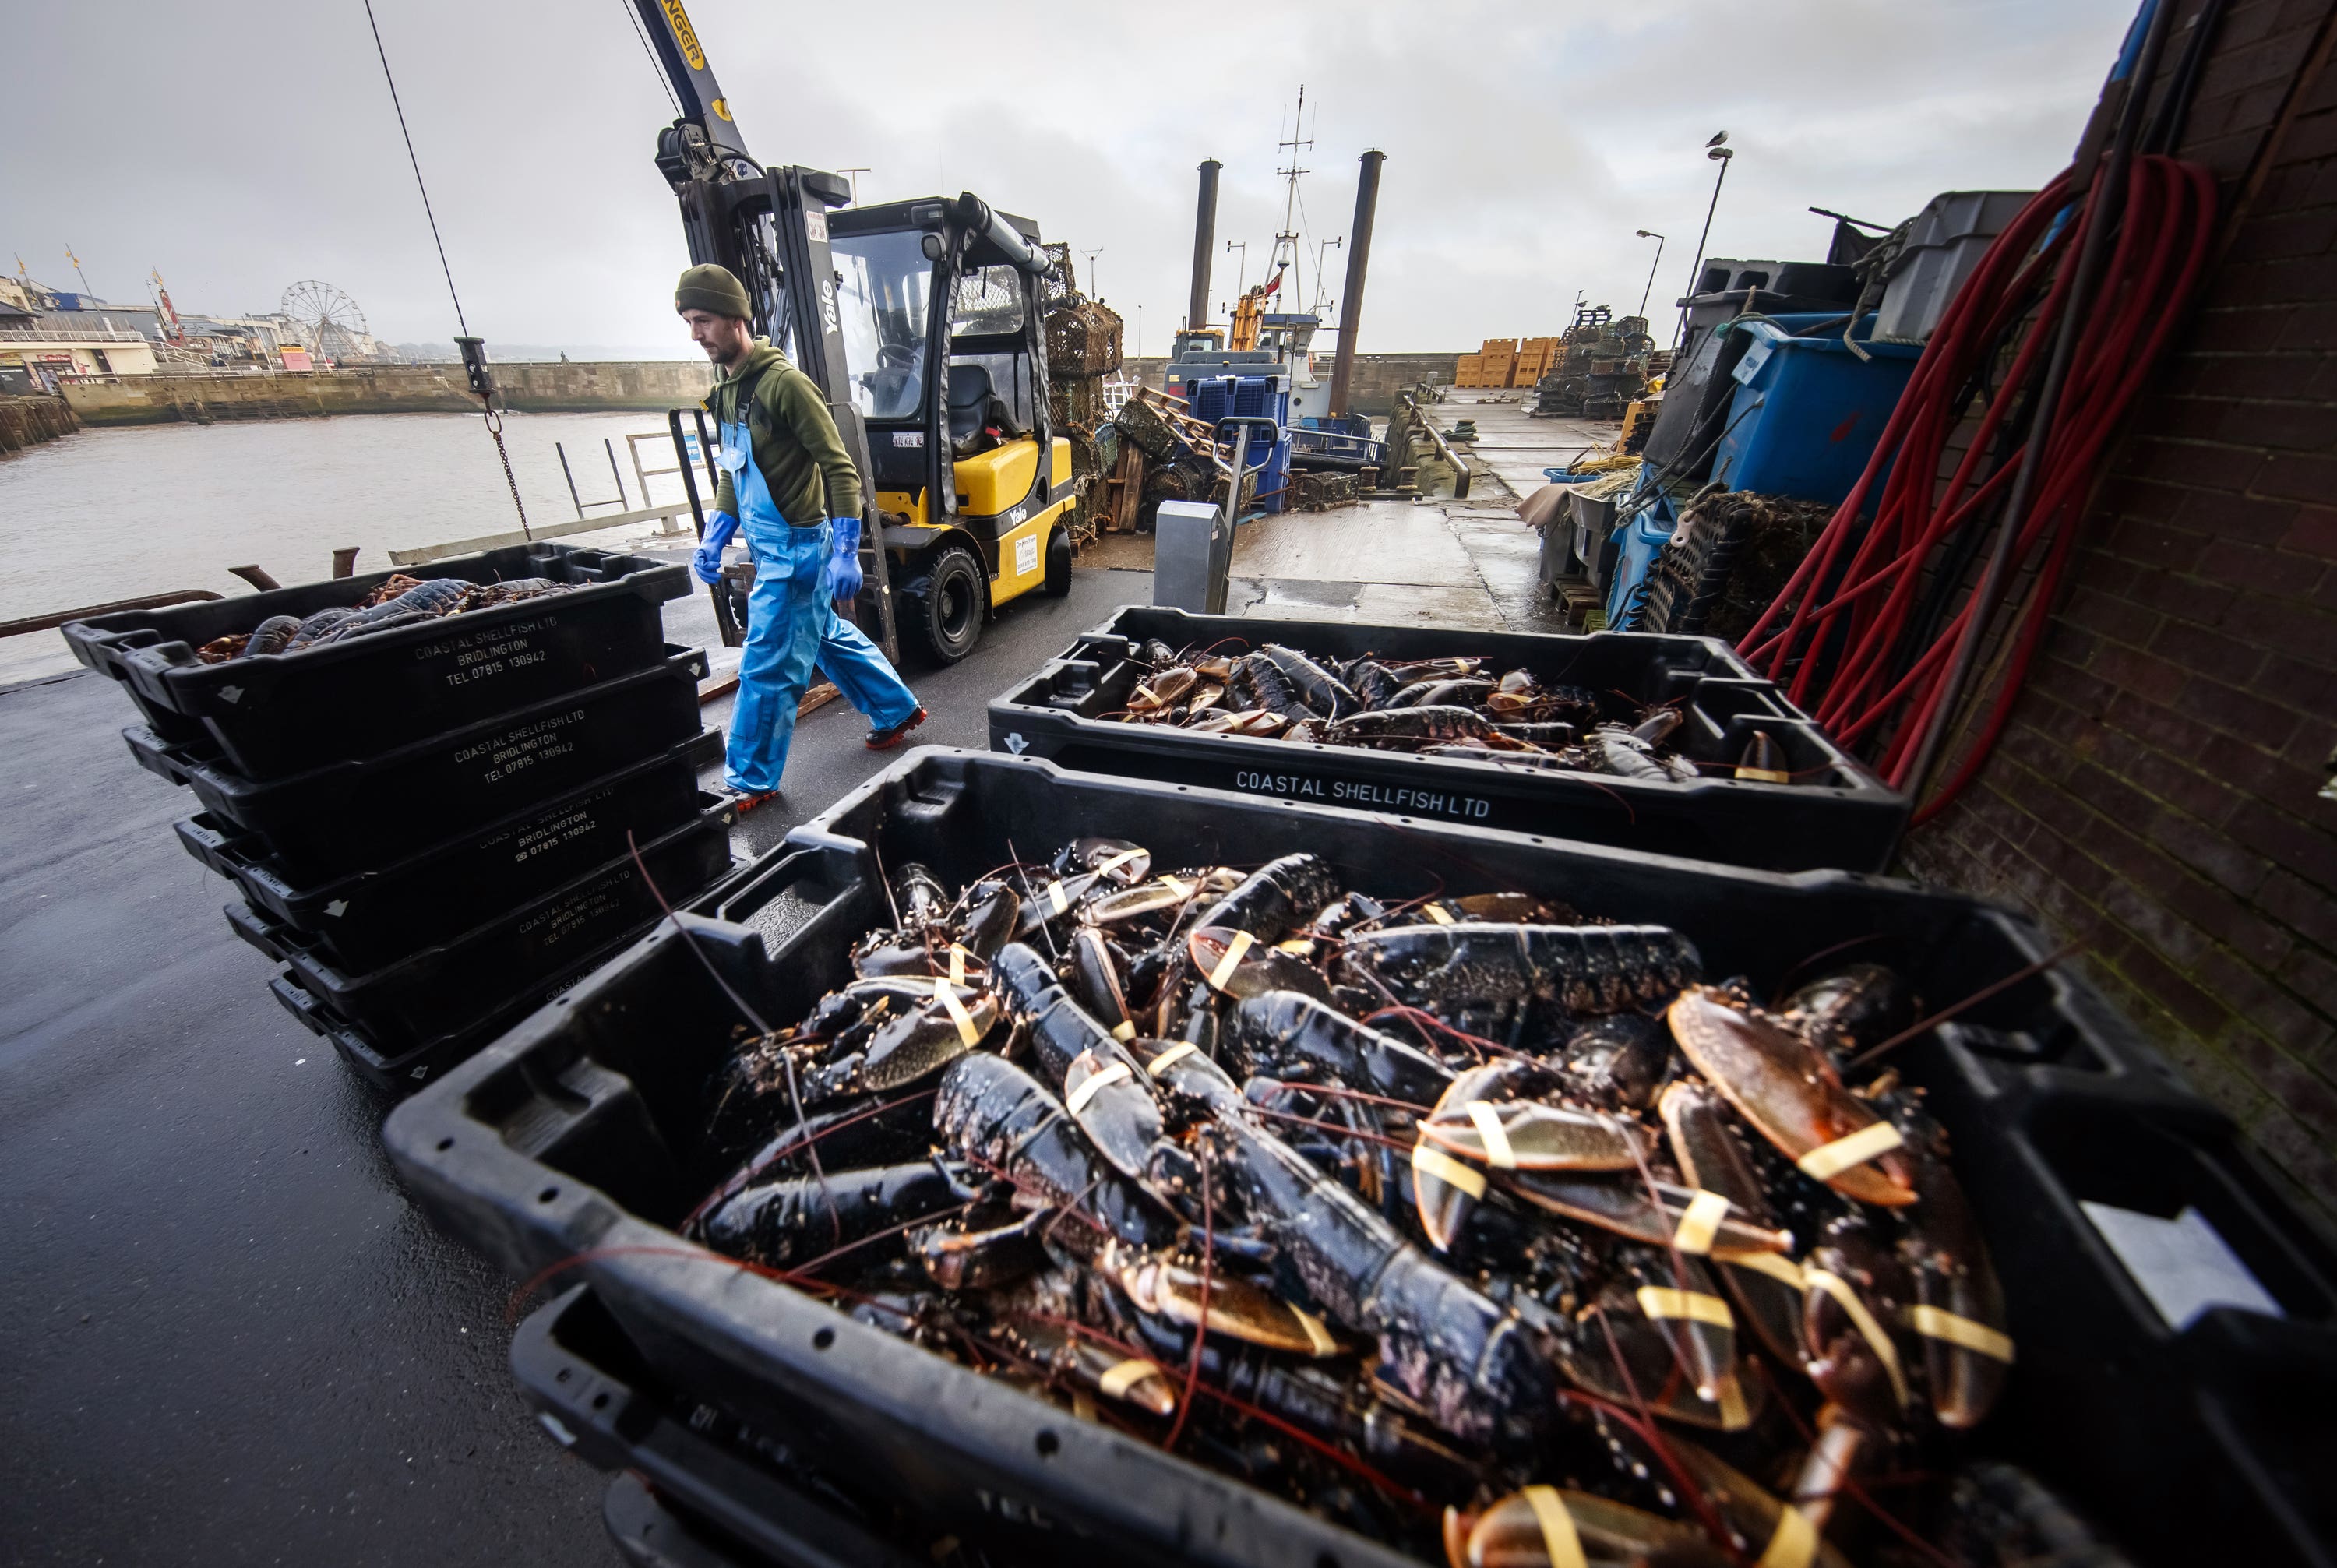 Mr Eustice said his department was ‘working daily with the fishing sector to tackle and iron out any particular issues’ (Danny Lawson/PA).